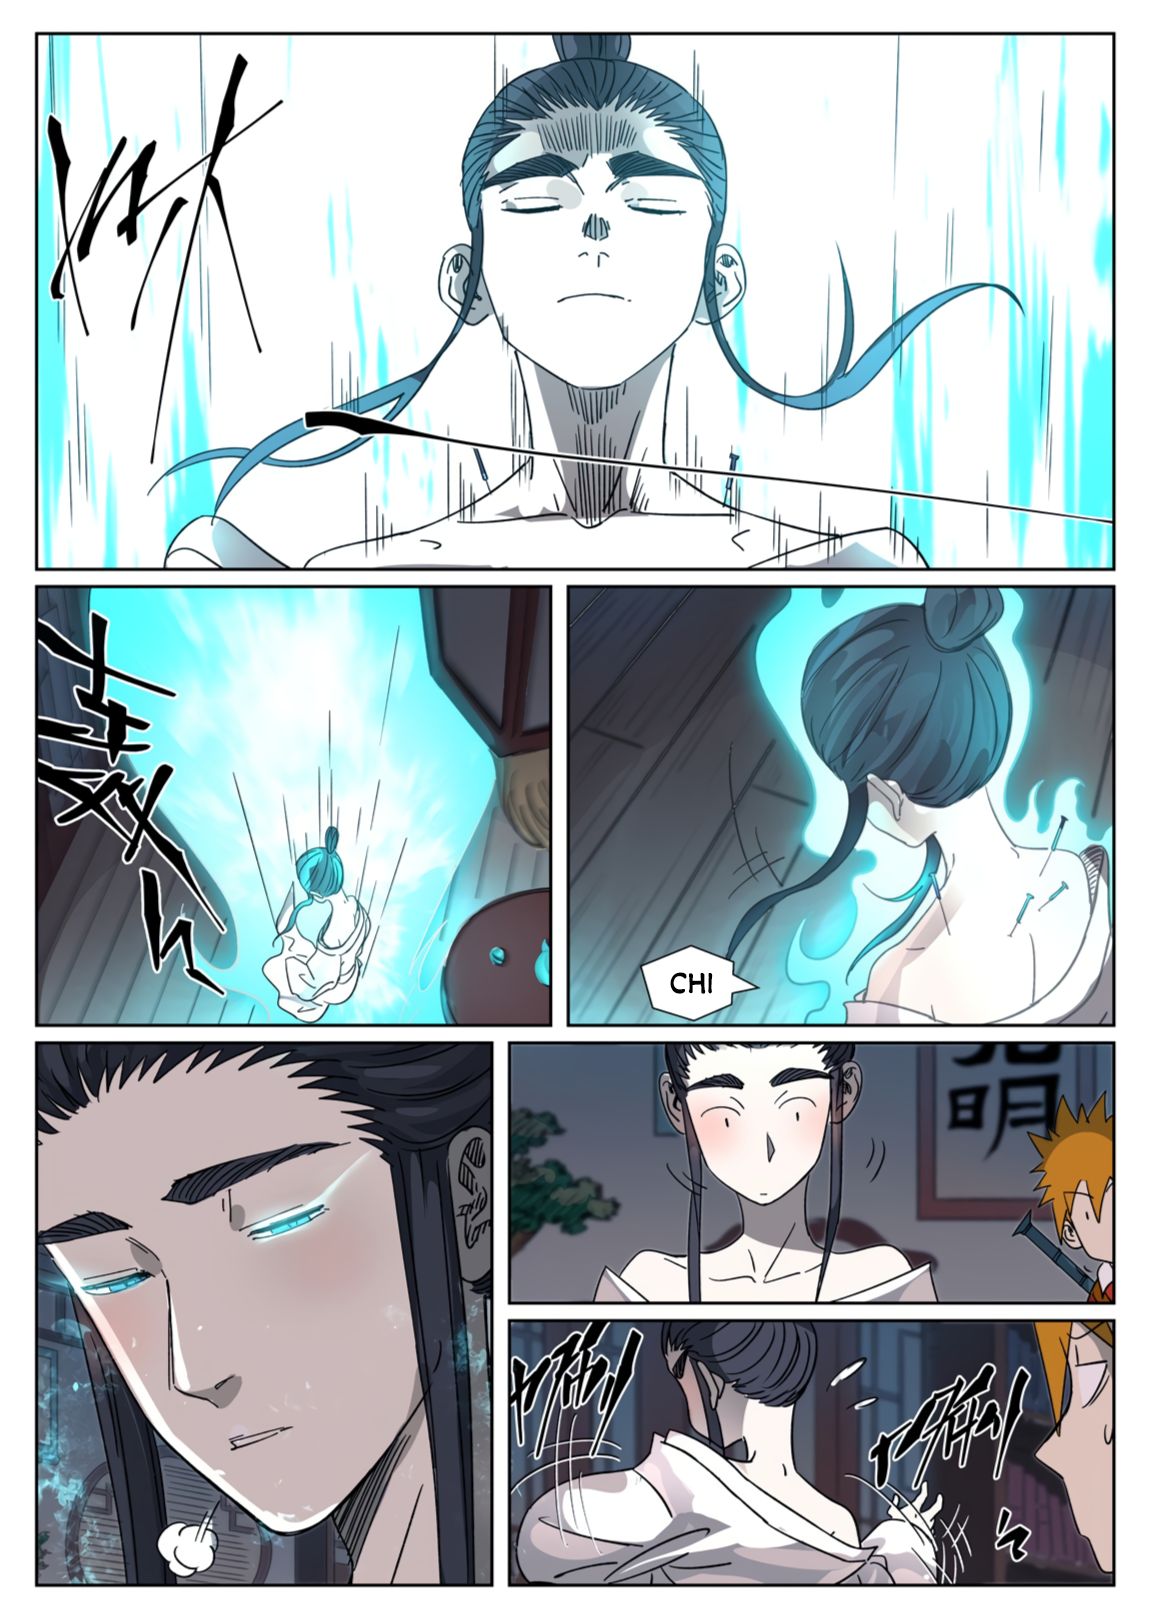 Tales of Demons and Gods Manhua Chapter 304.1 - Page 2